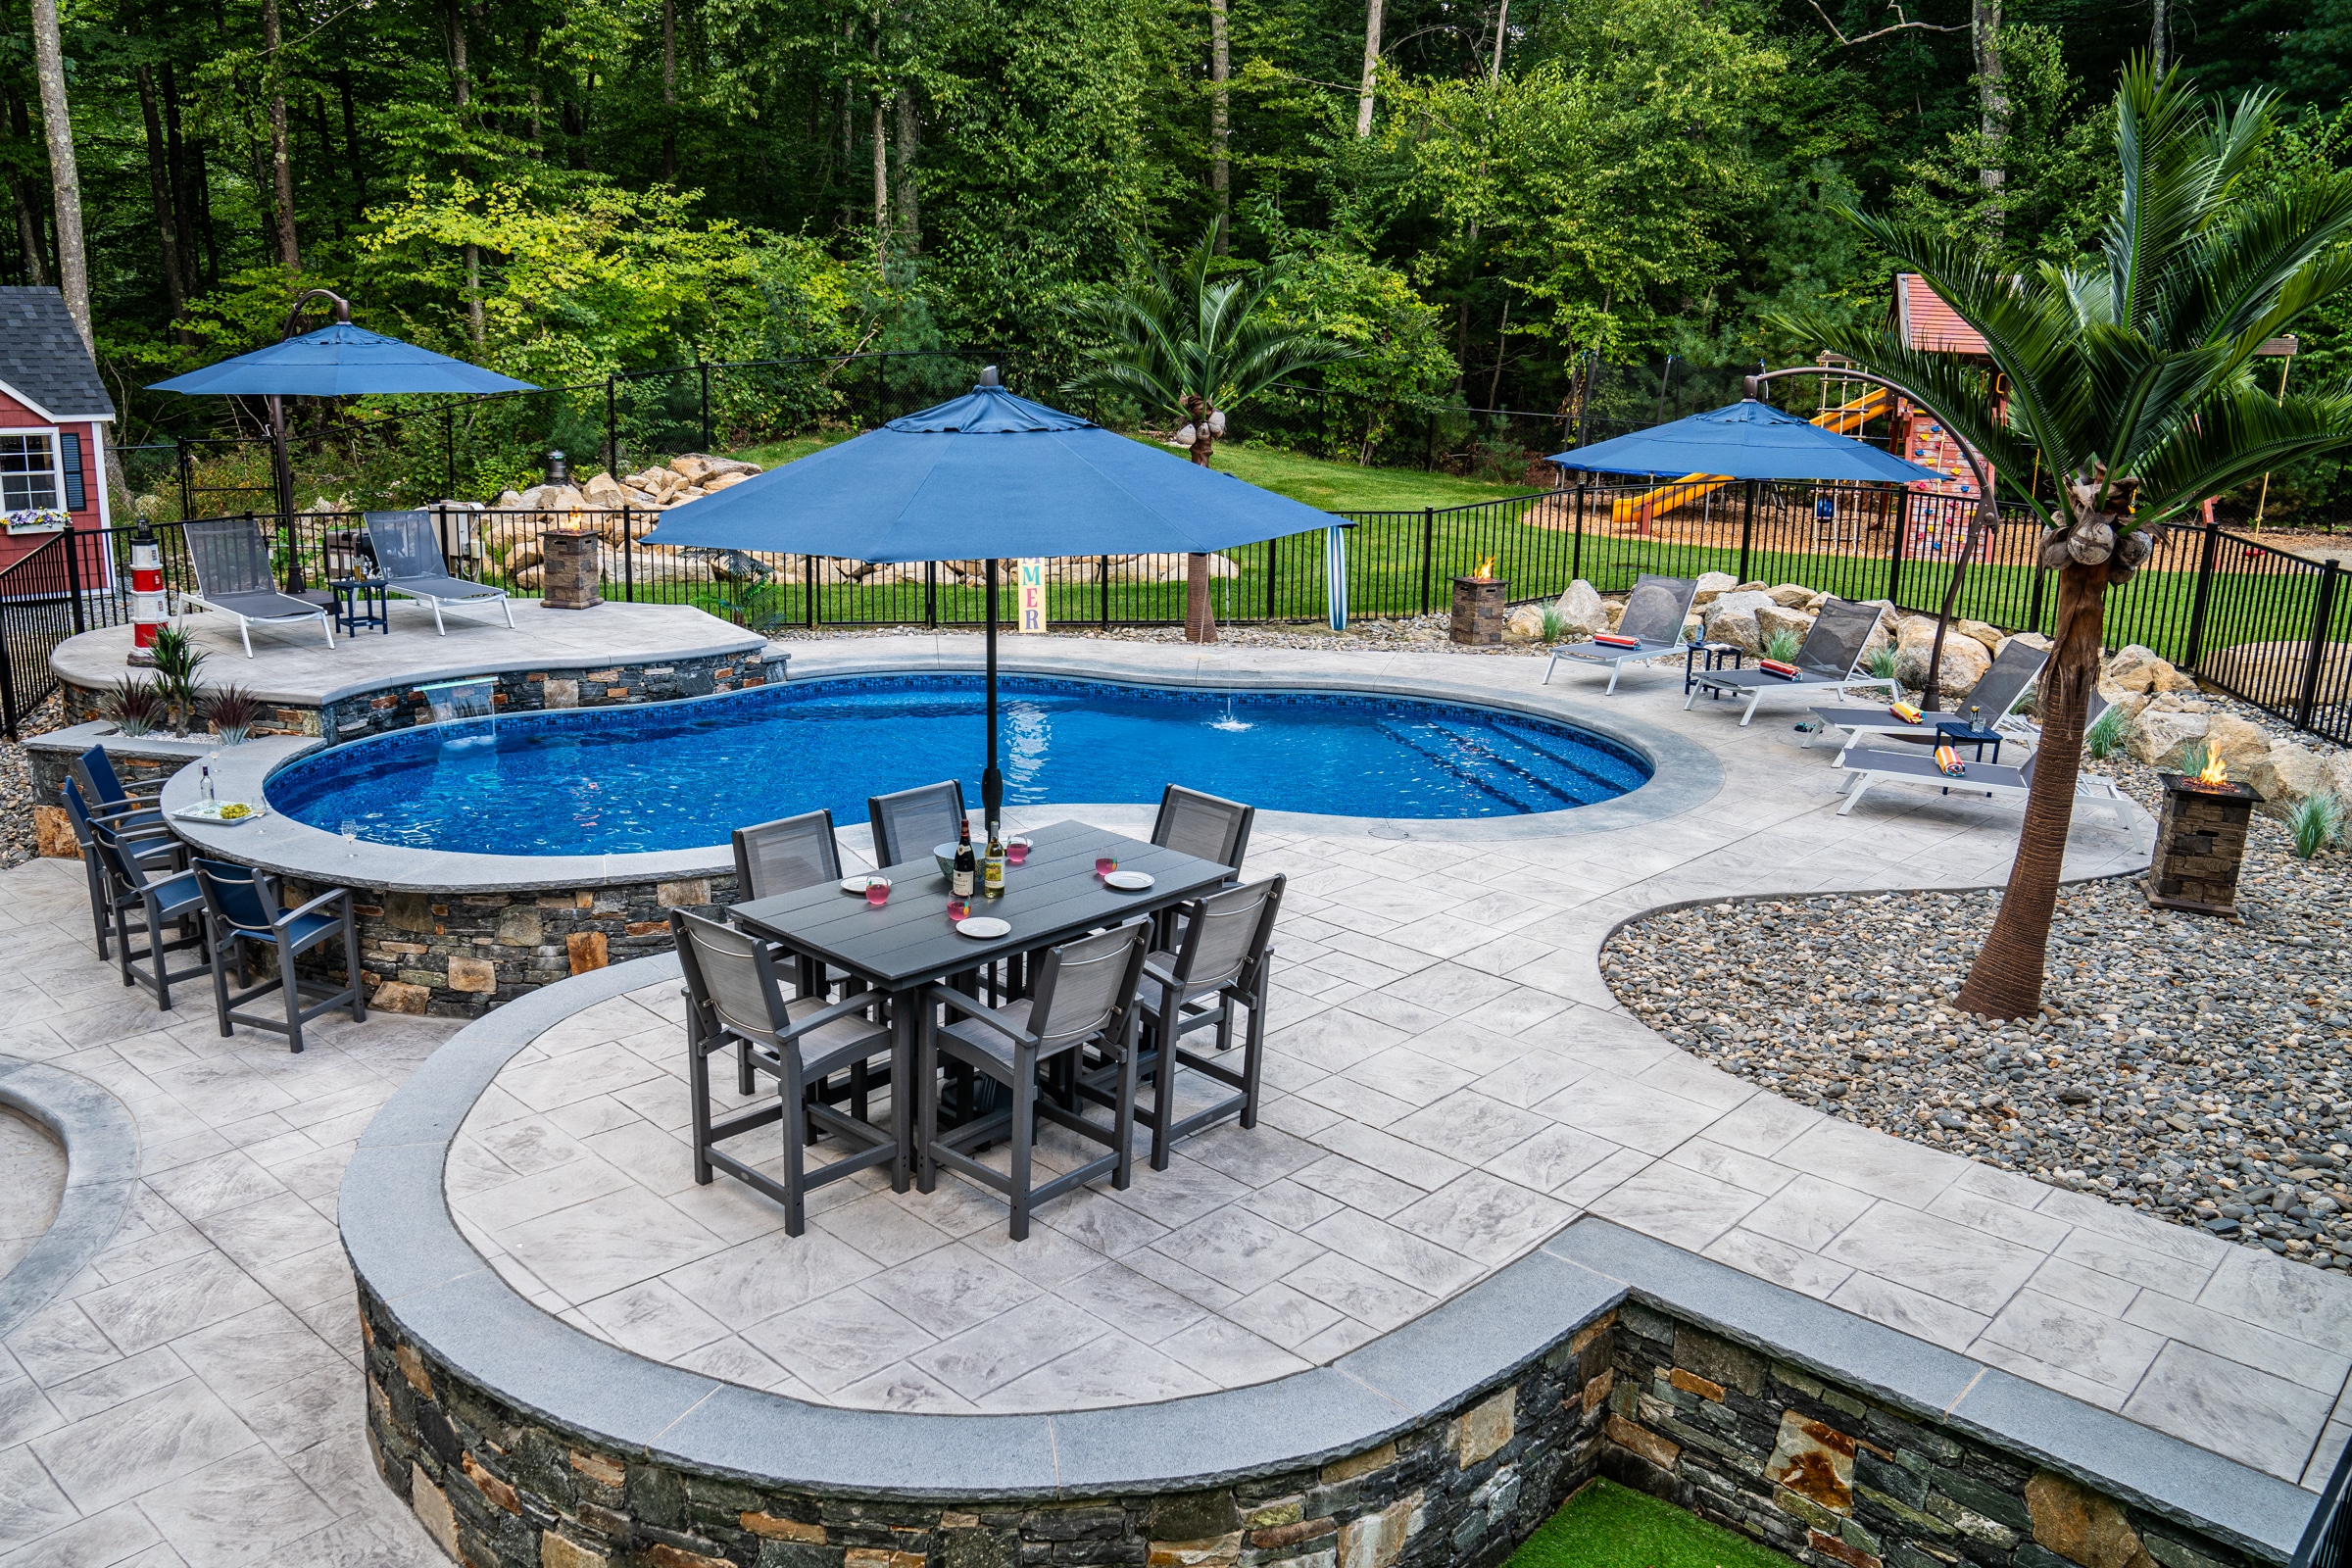 Northbridge, MA hardscape with stamped concrete walkways, pool deck, poolside bar, and sundeck, all built by Dex by Terra.